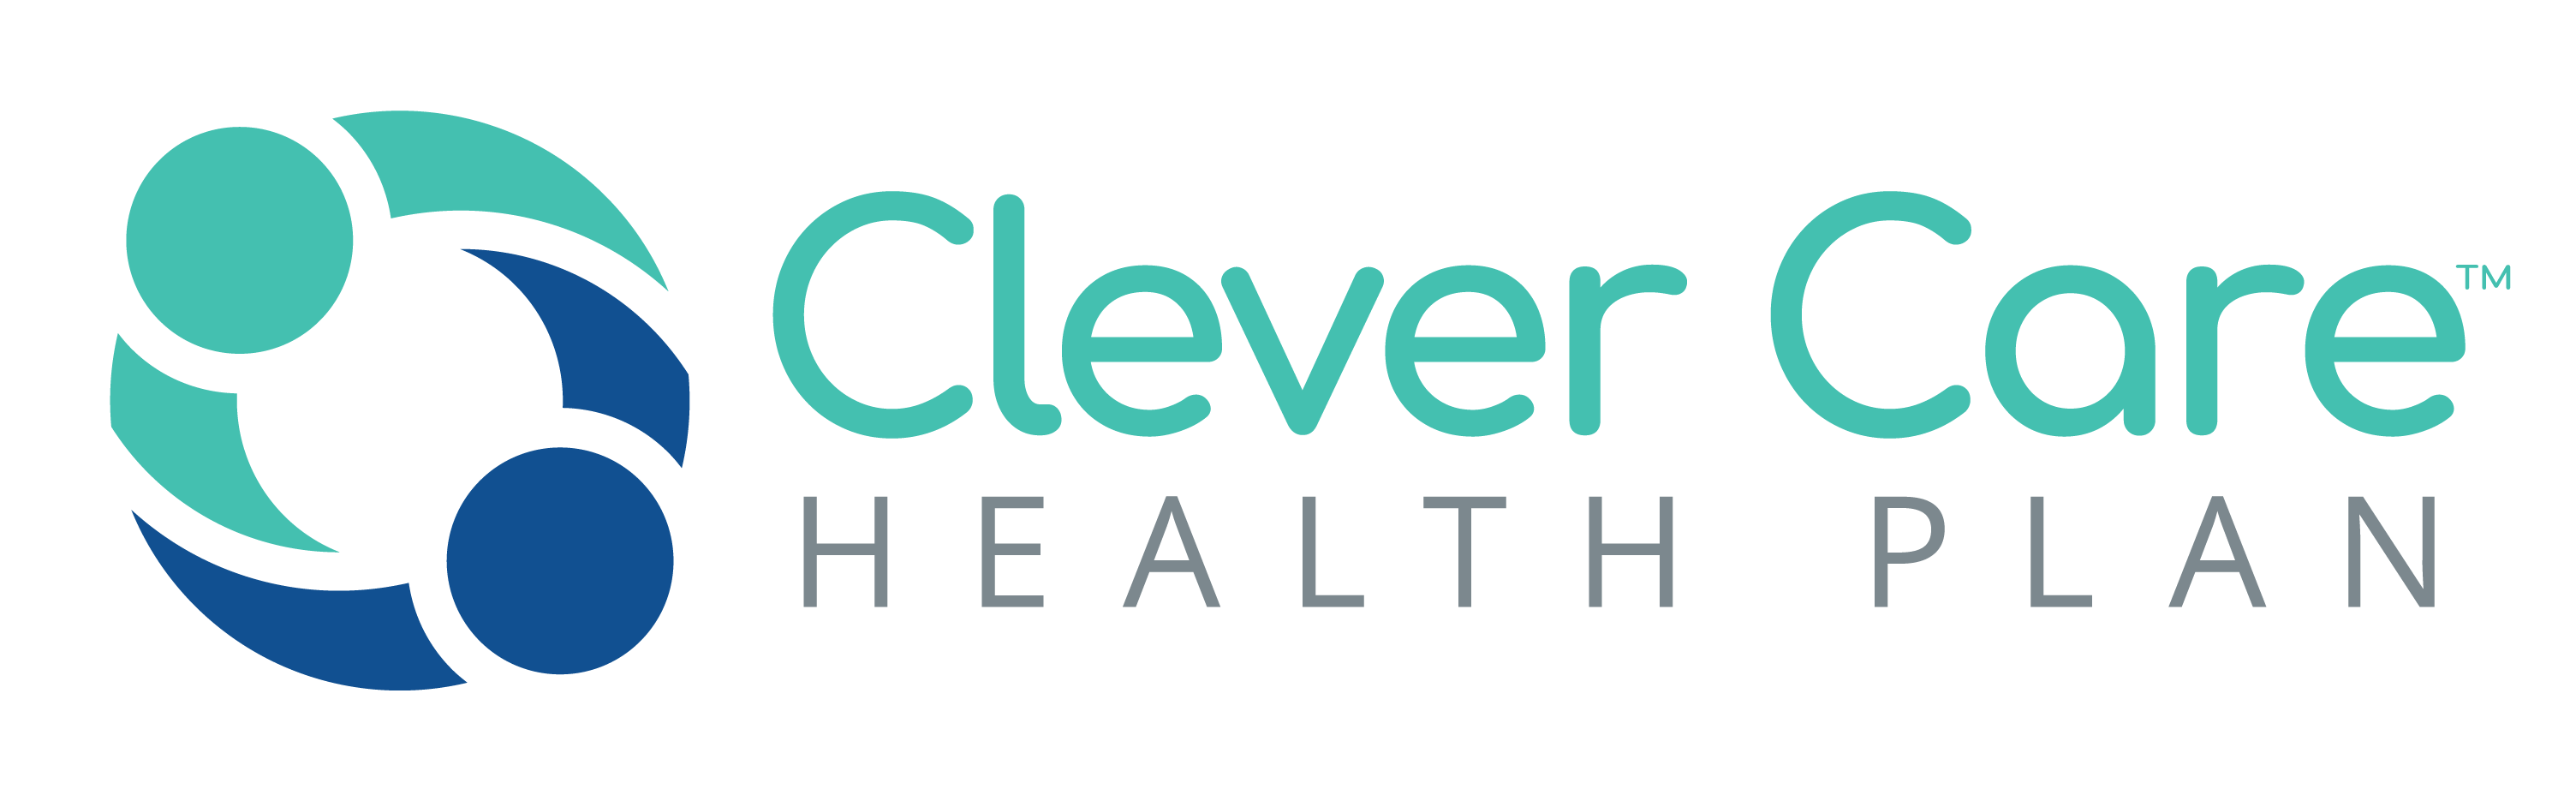 Clever Care Health Plan Logo